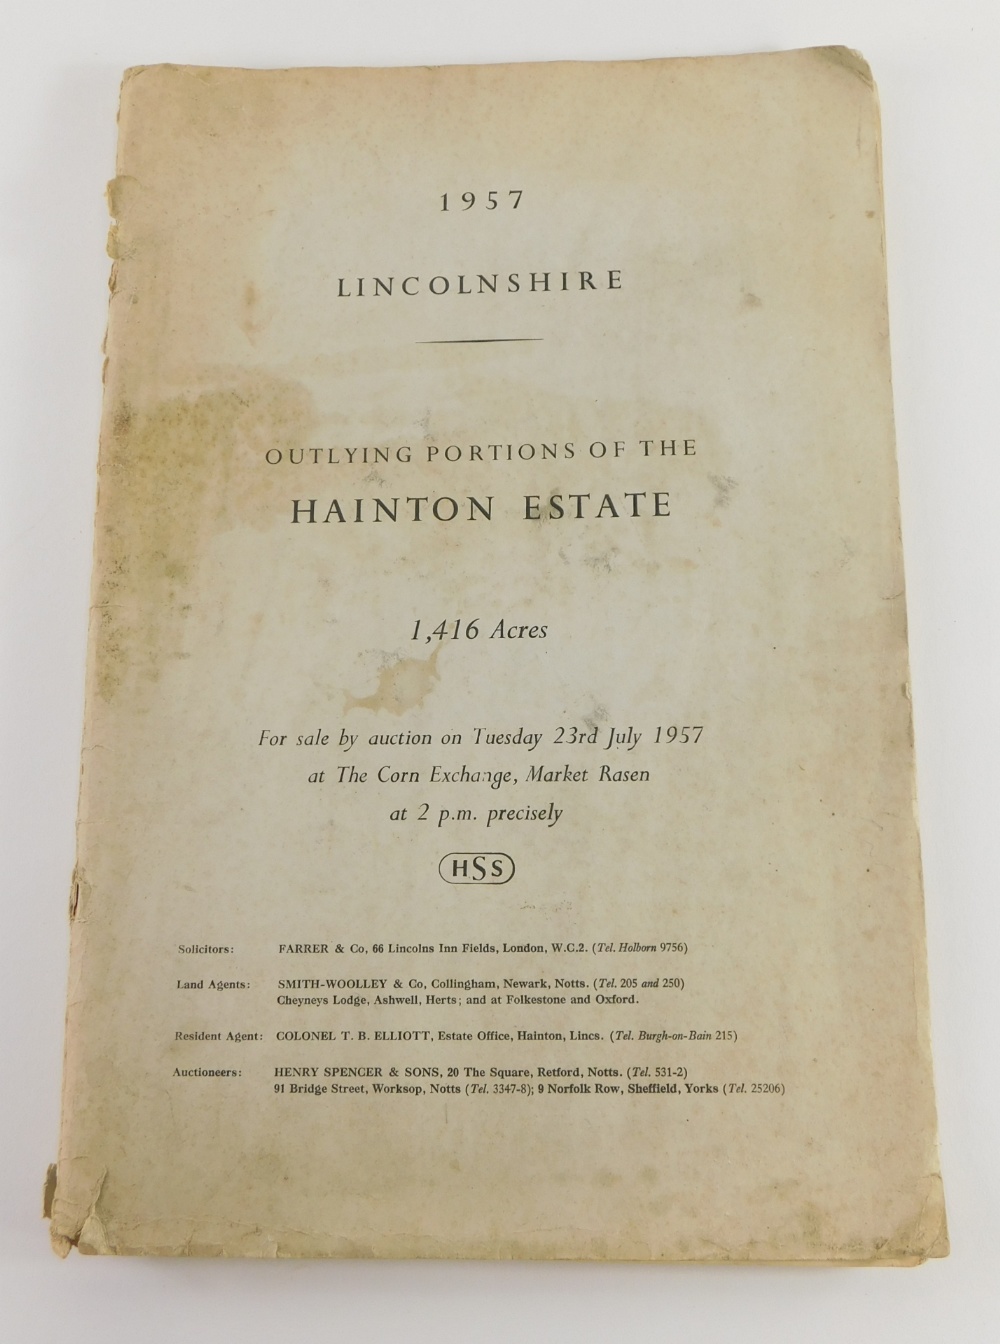 A 1957 Henry Spencer's sale catalogue, Outlying Portions of The Hainton Estate, sold Tuesday 23rd Ju